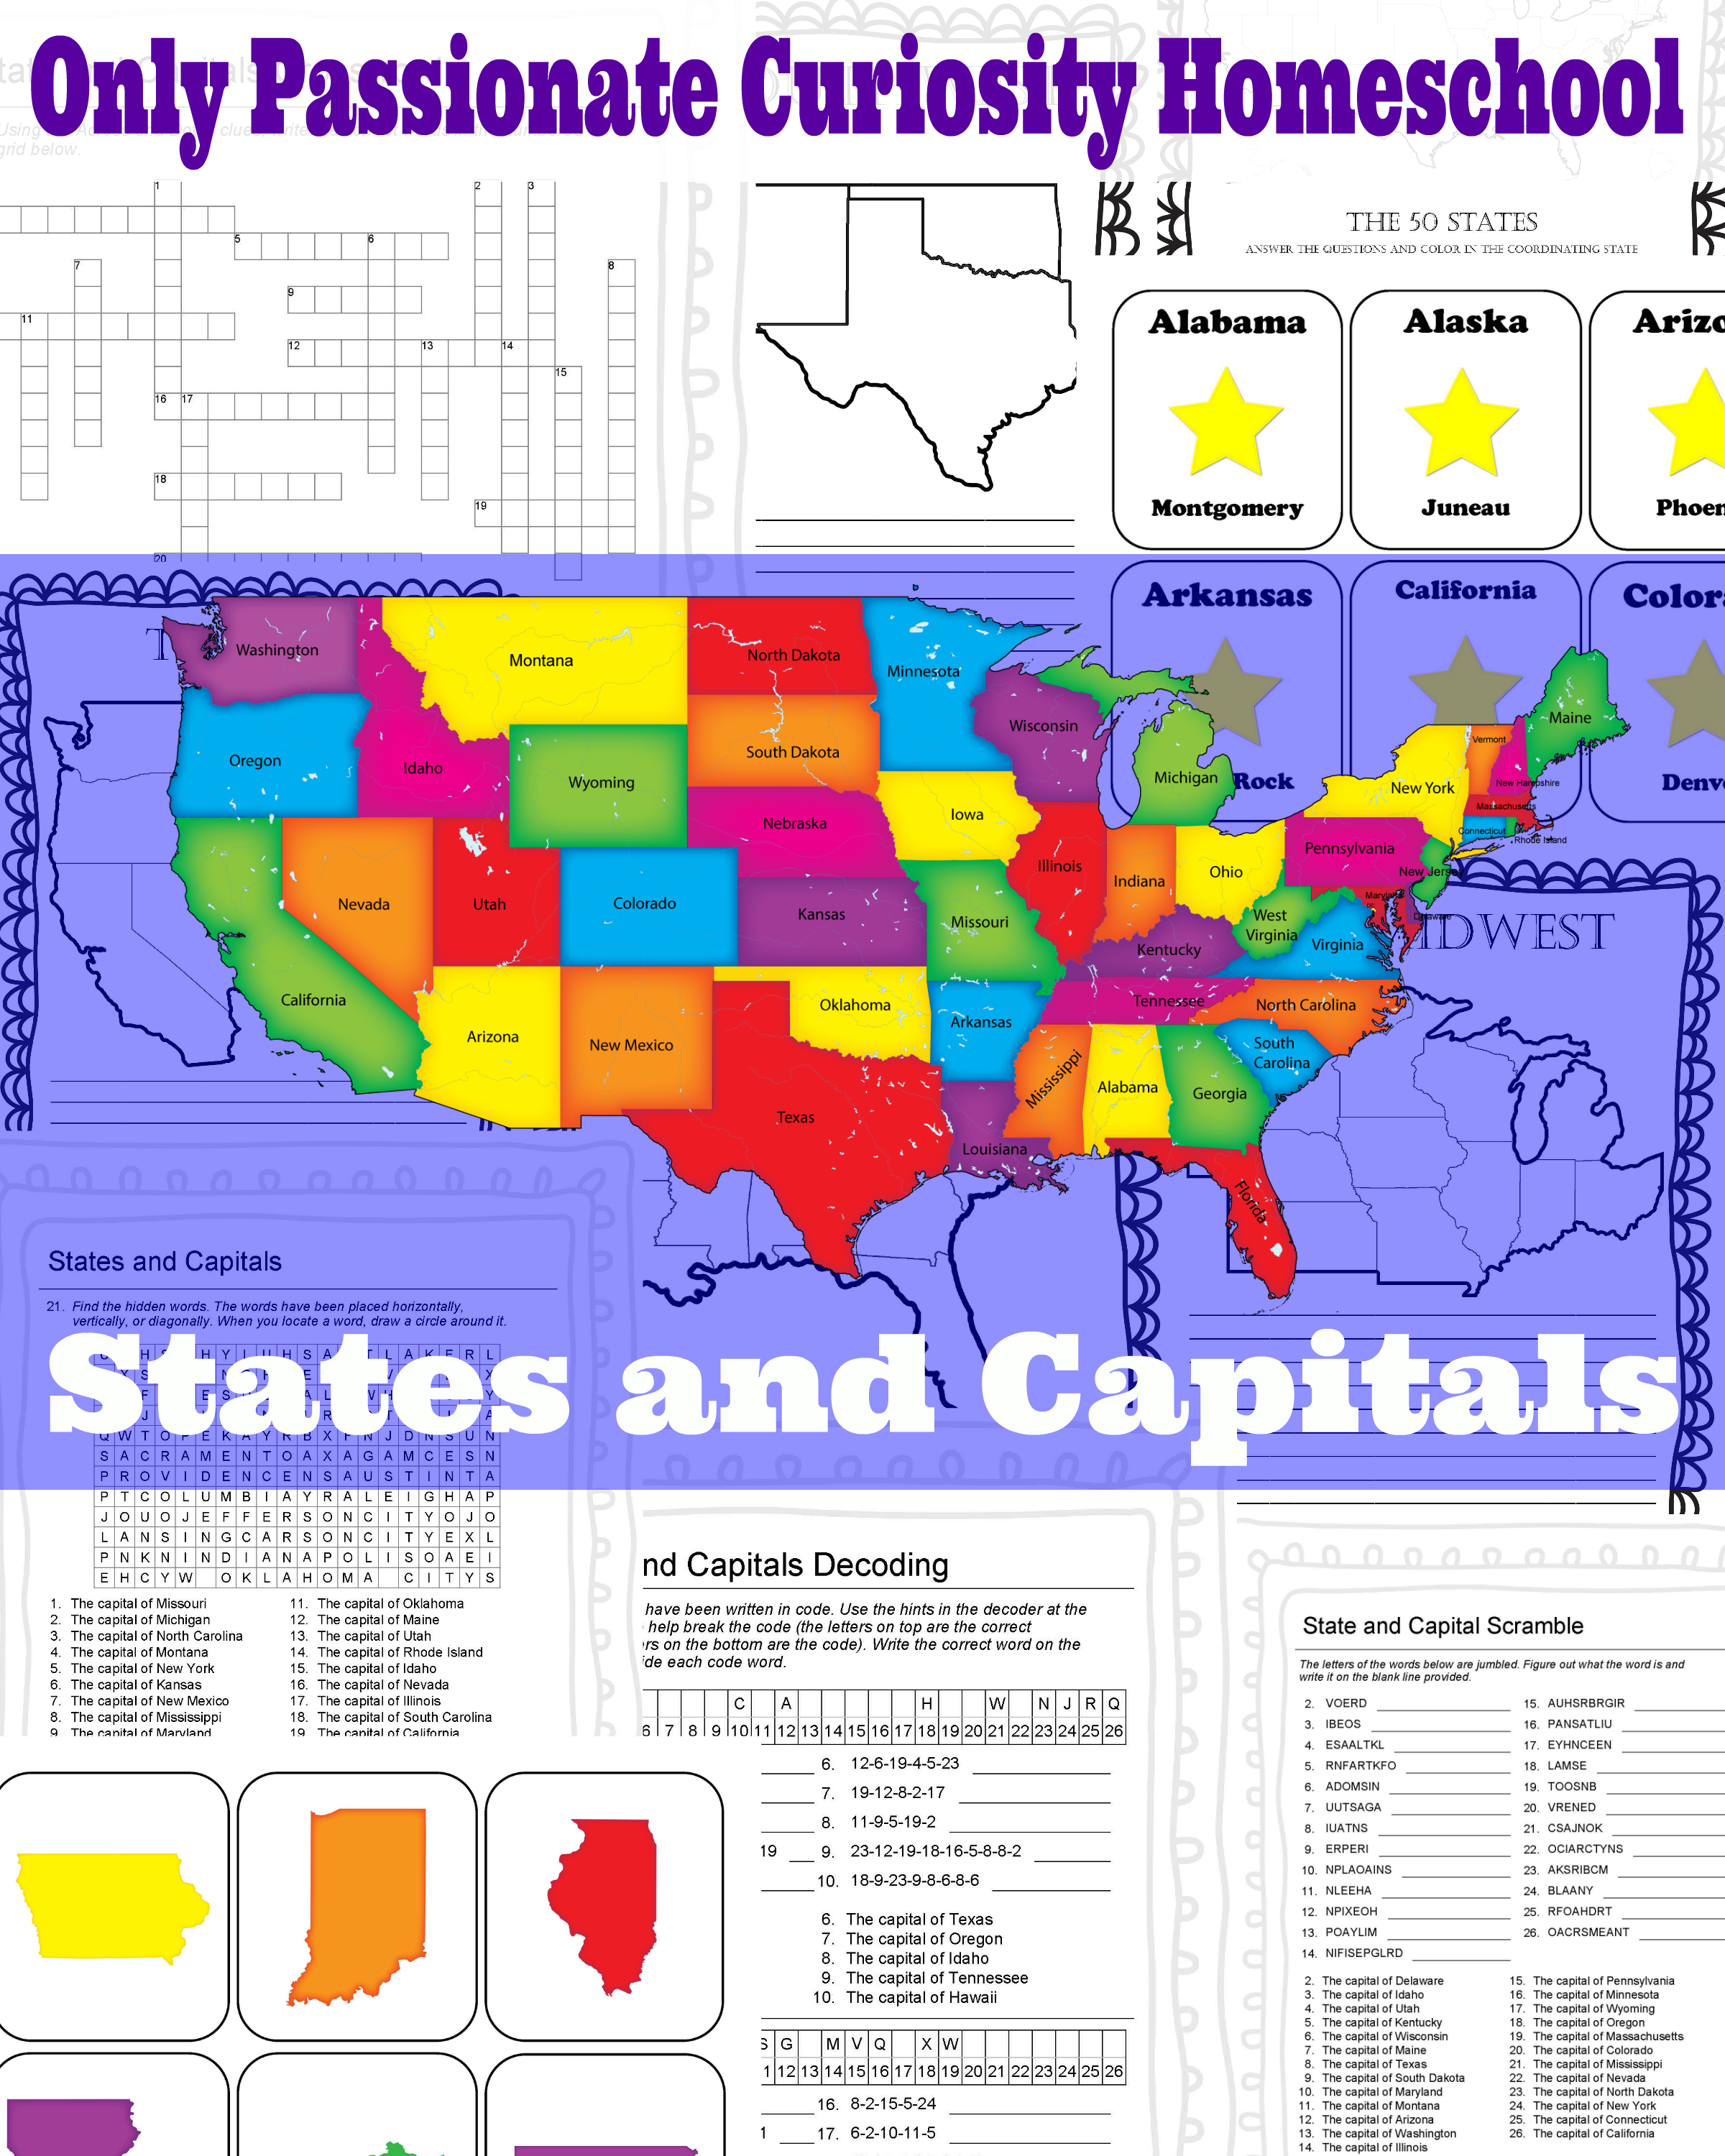 States and Capitals Pack - Only Passionate Curiosity